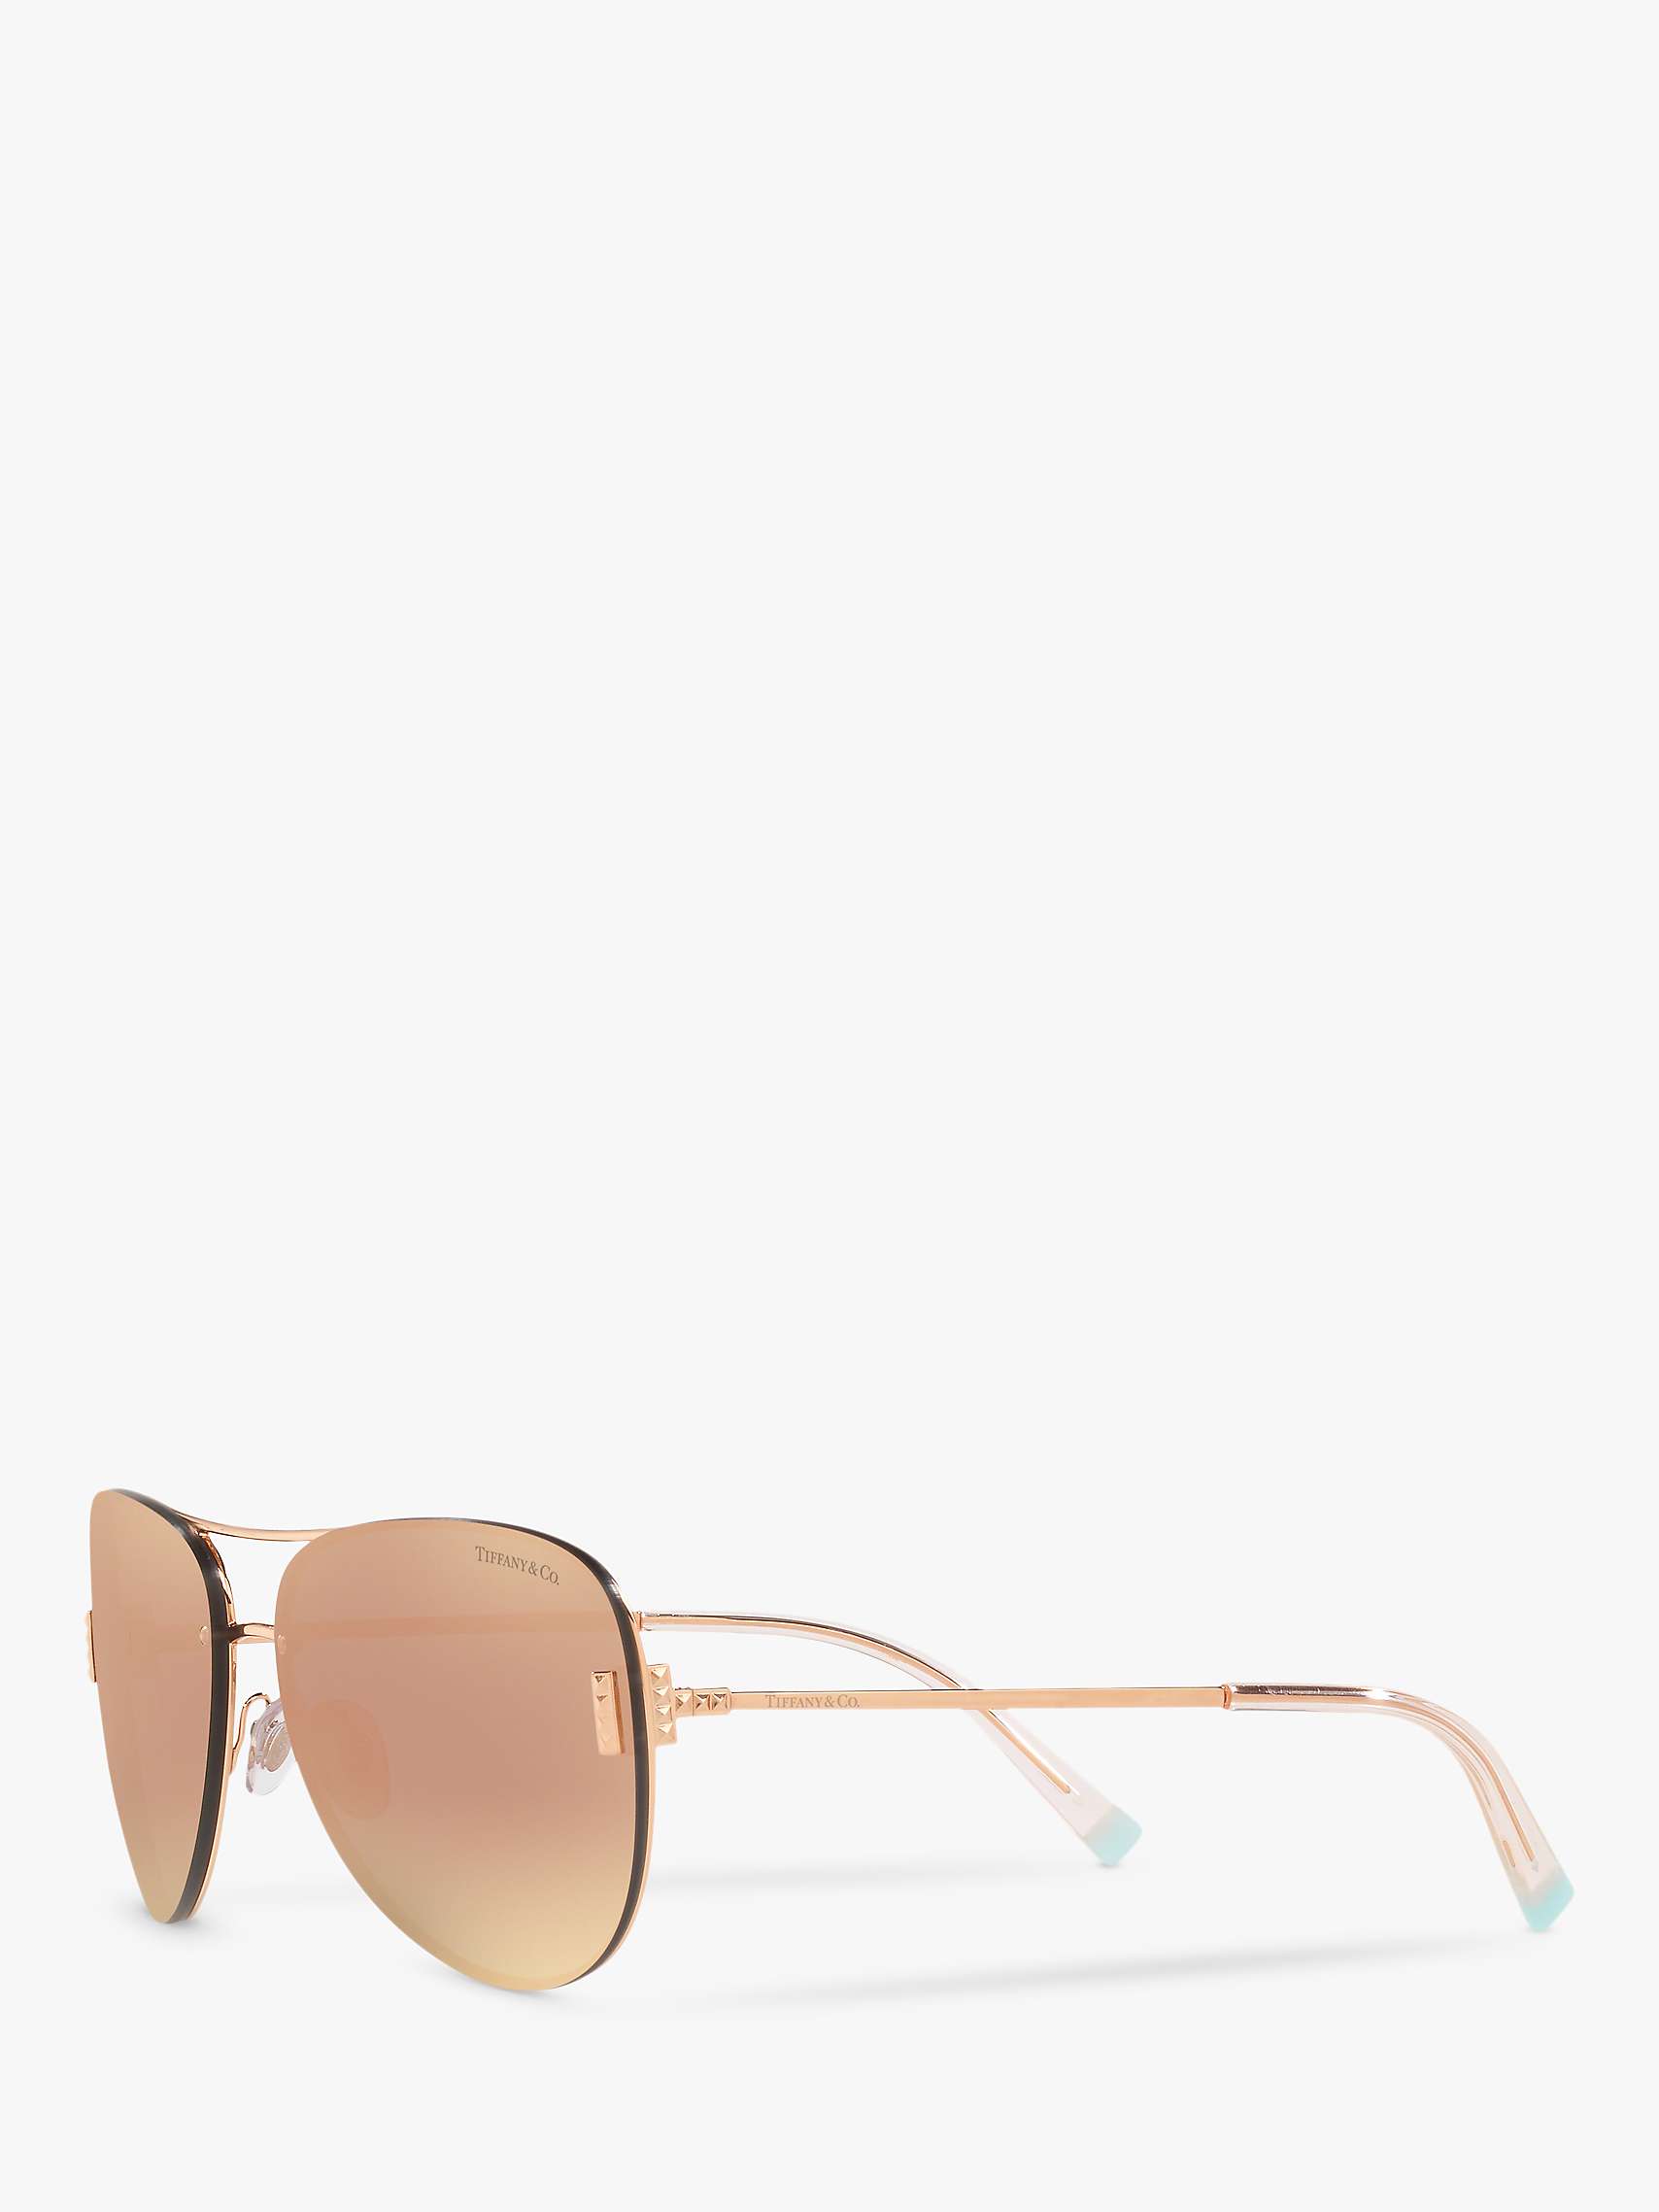 Buy Tiffany & Co TF3066 Women's Aviator Sunglasses, Red Maroon/Gold Online at johnlewis.com